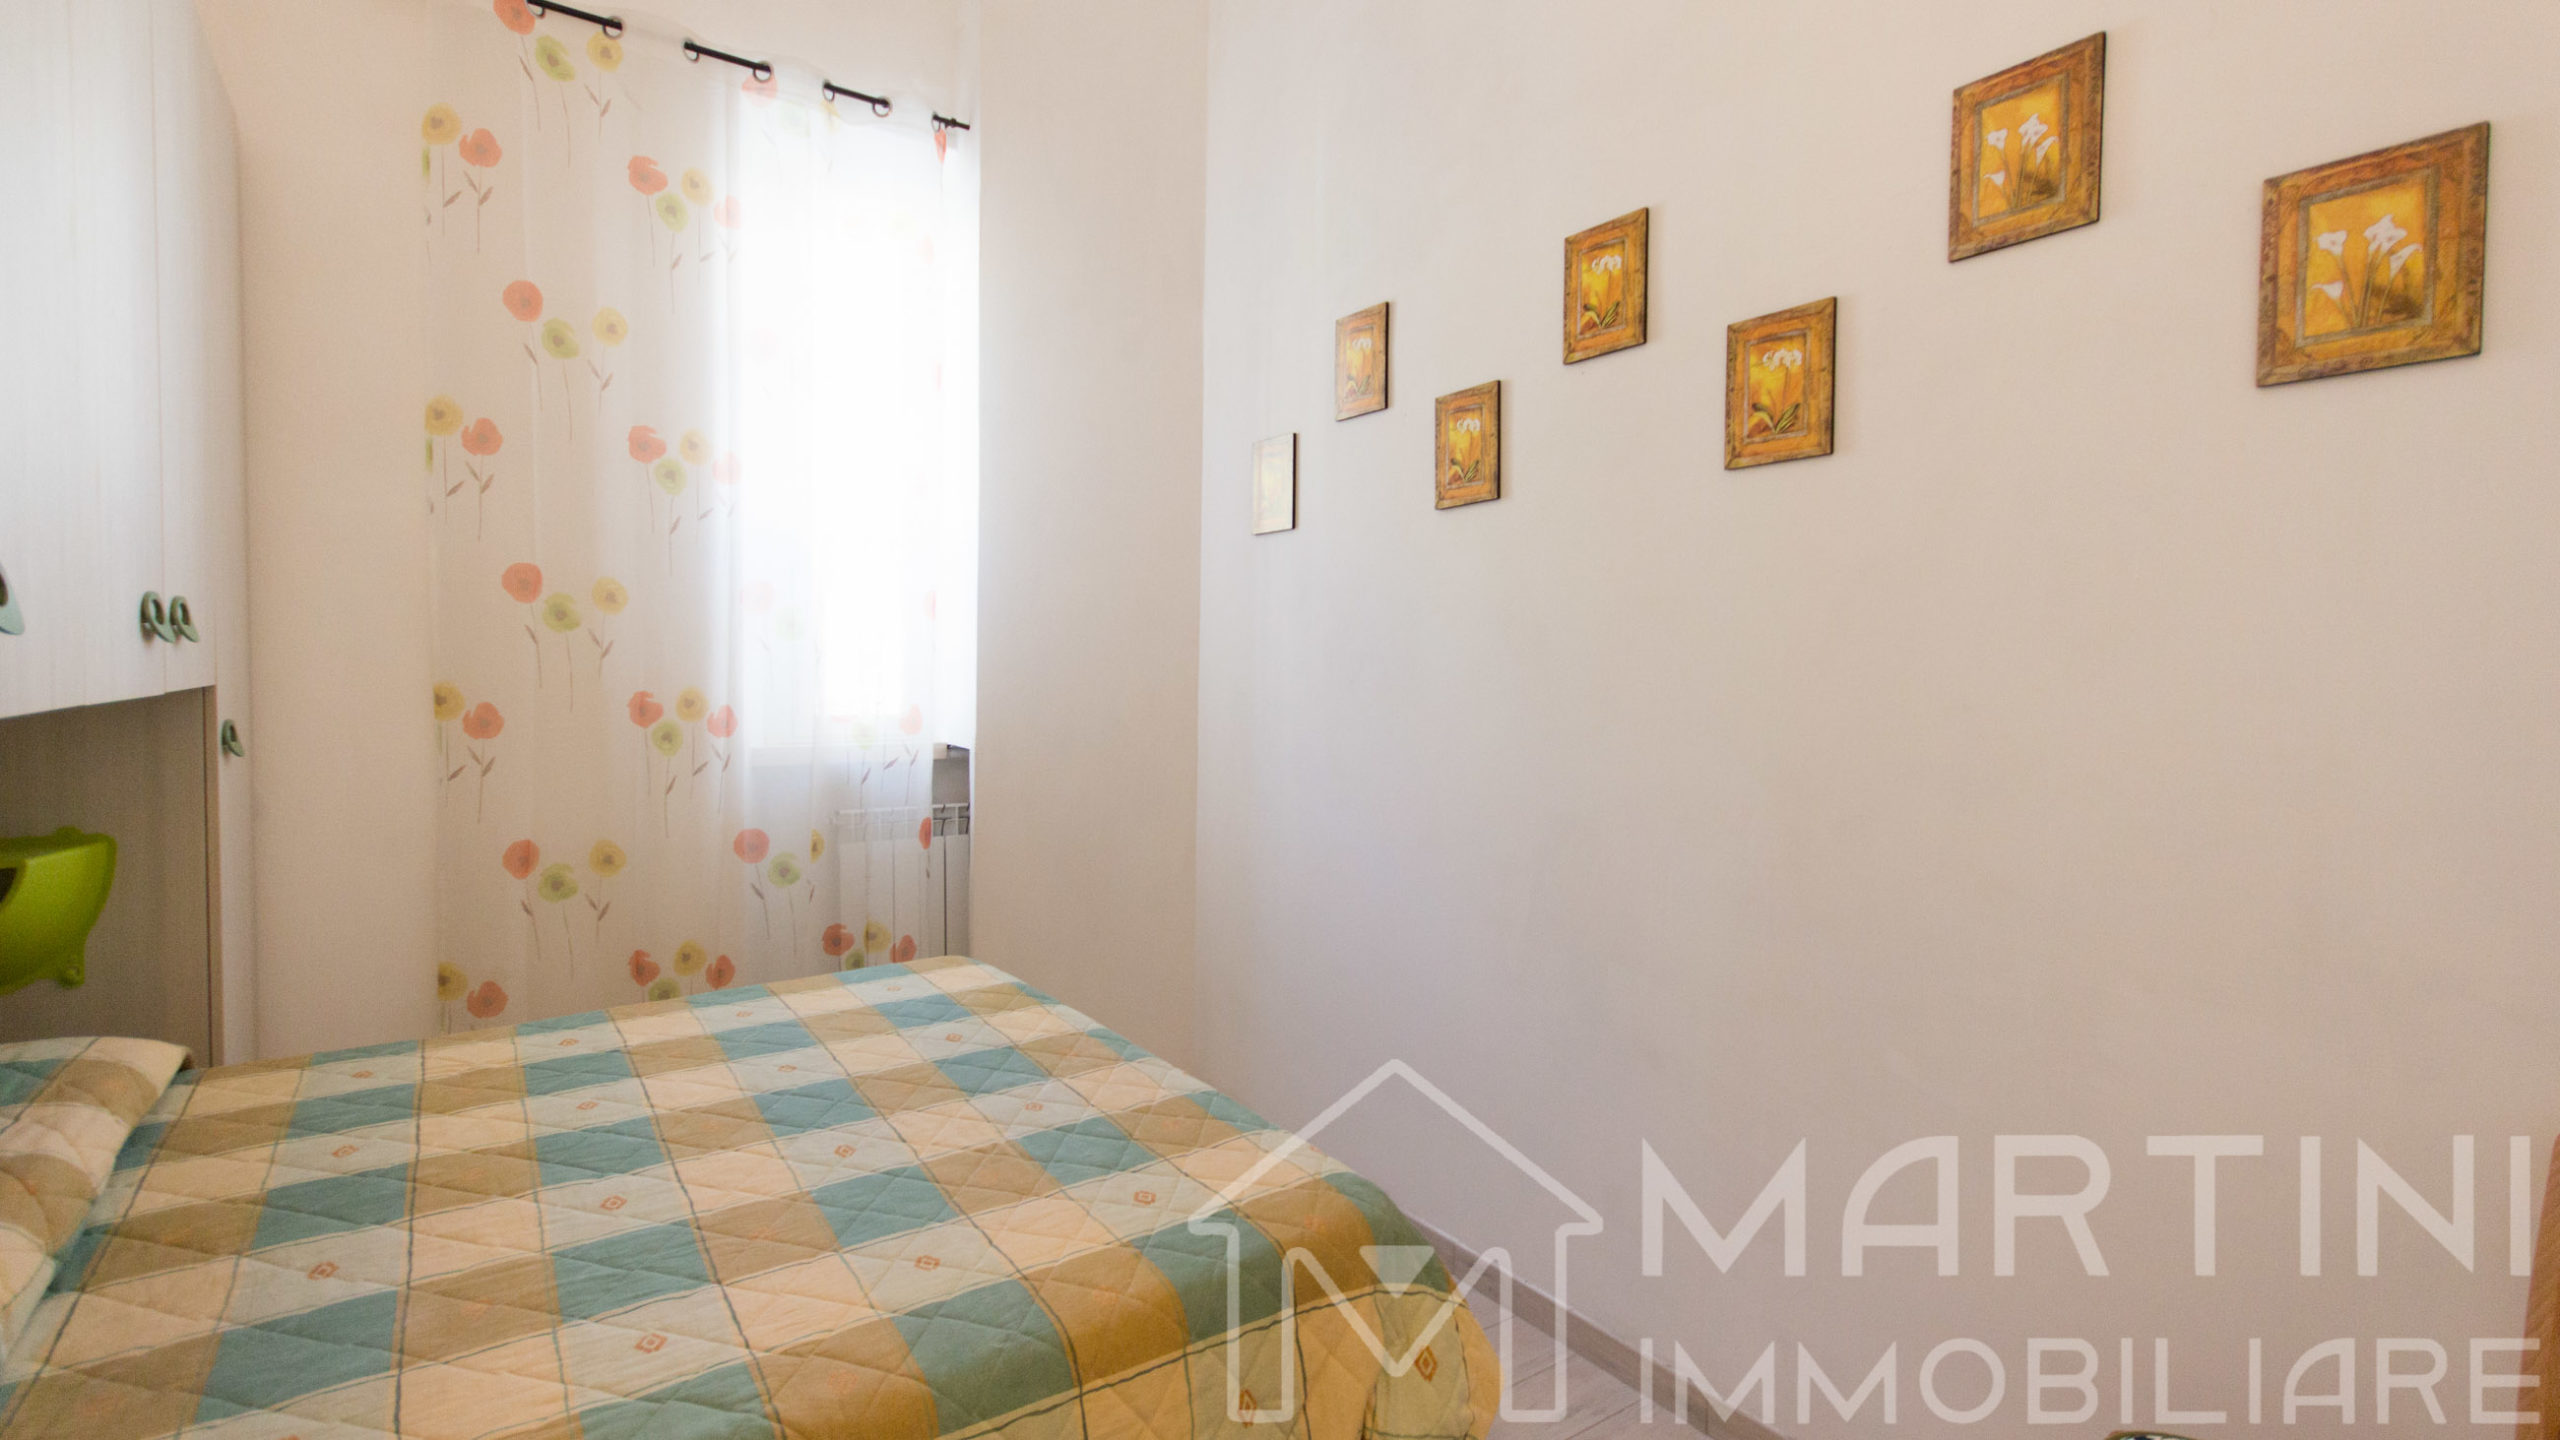 Follonica Apartment to Rent with Outdoor Space